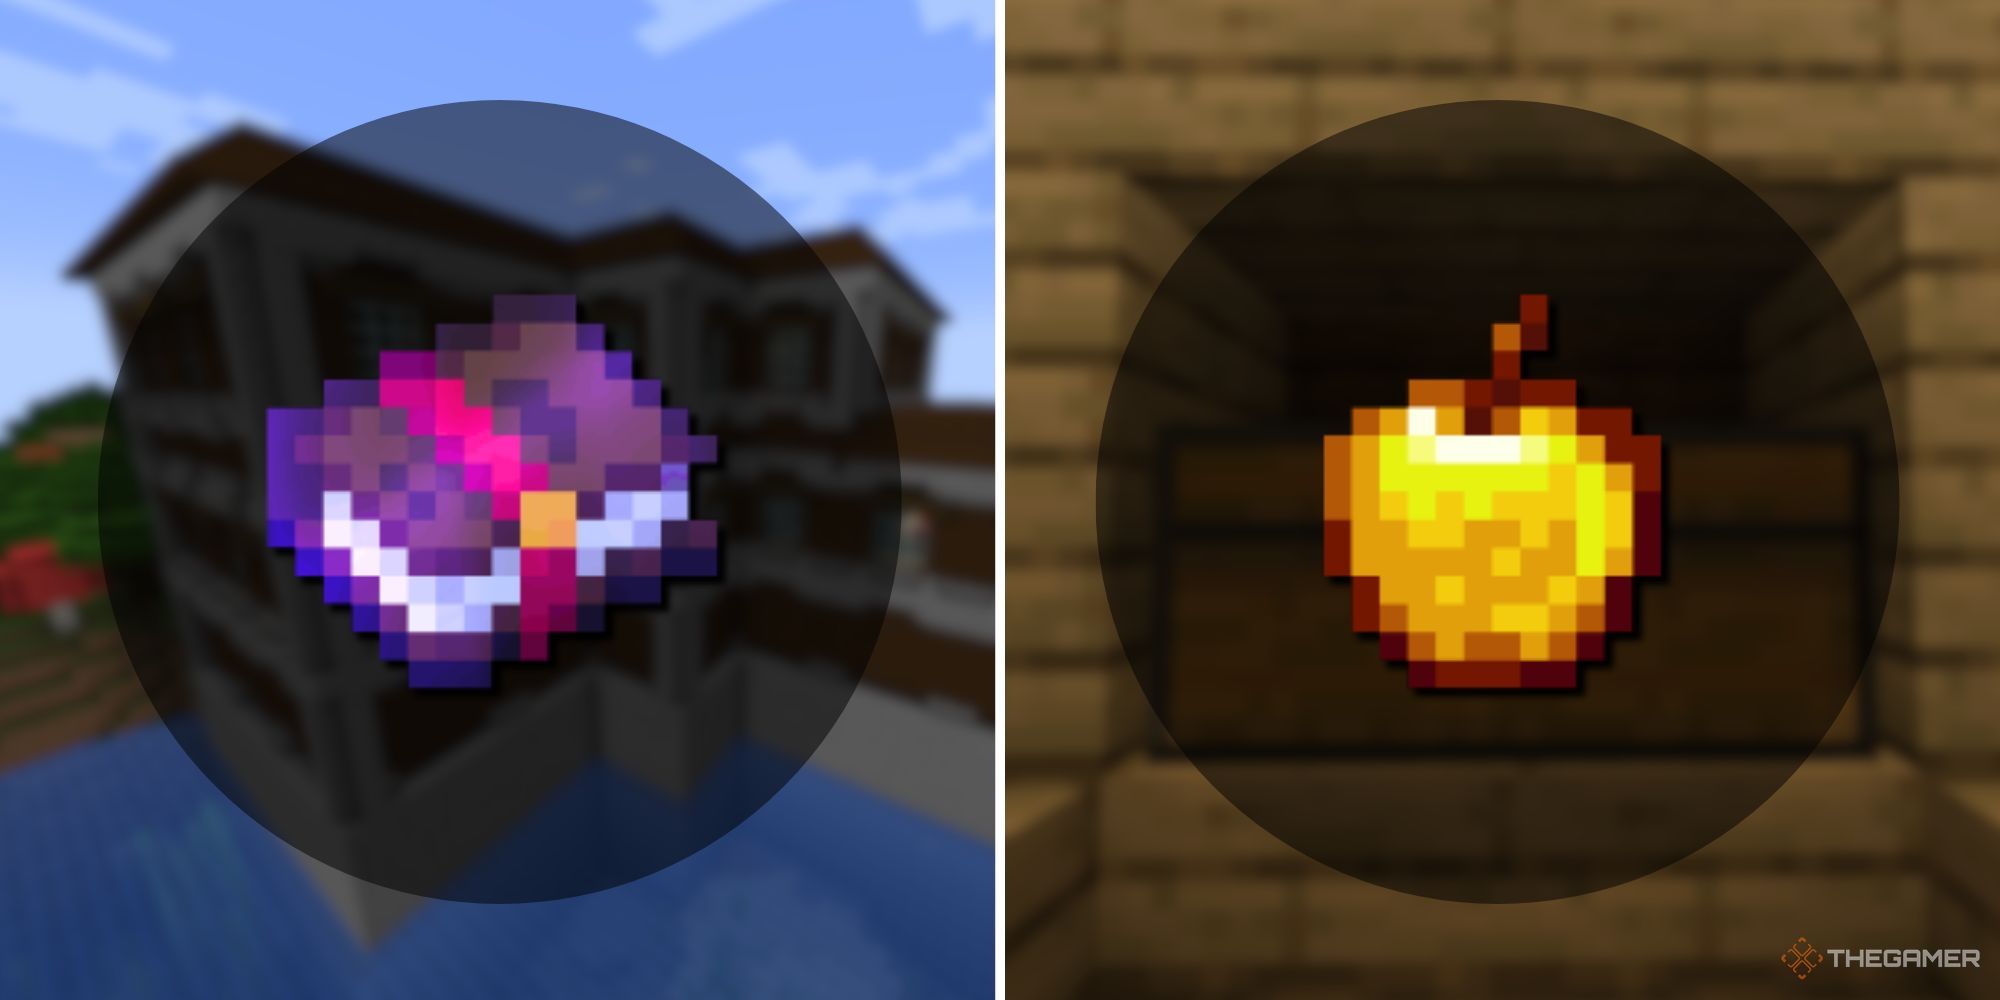 A split image of an enchanted book with a circular shadow and blurred woodland mansion behind it, and a golden apple with a circular shadow and blurred wooden chest behind it.